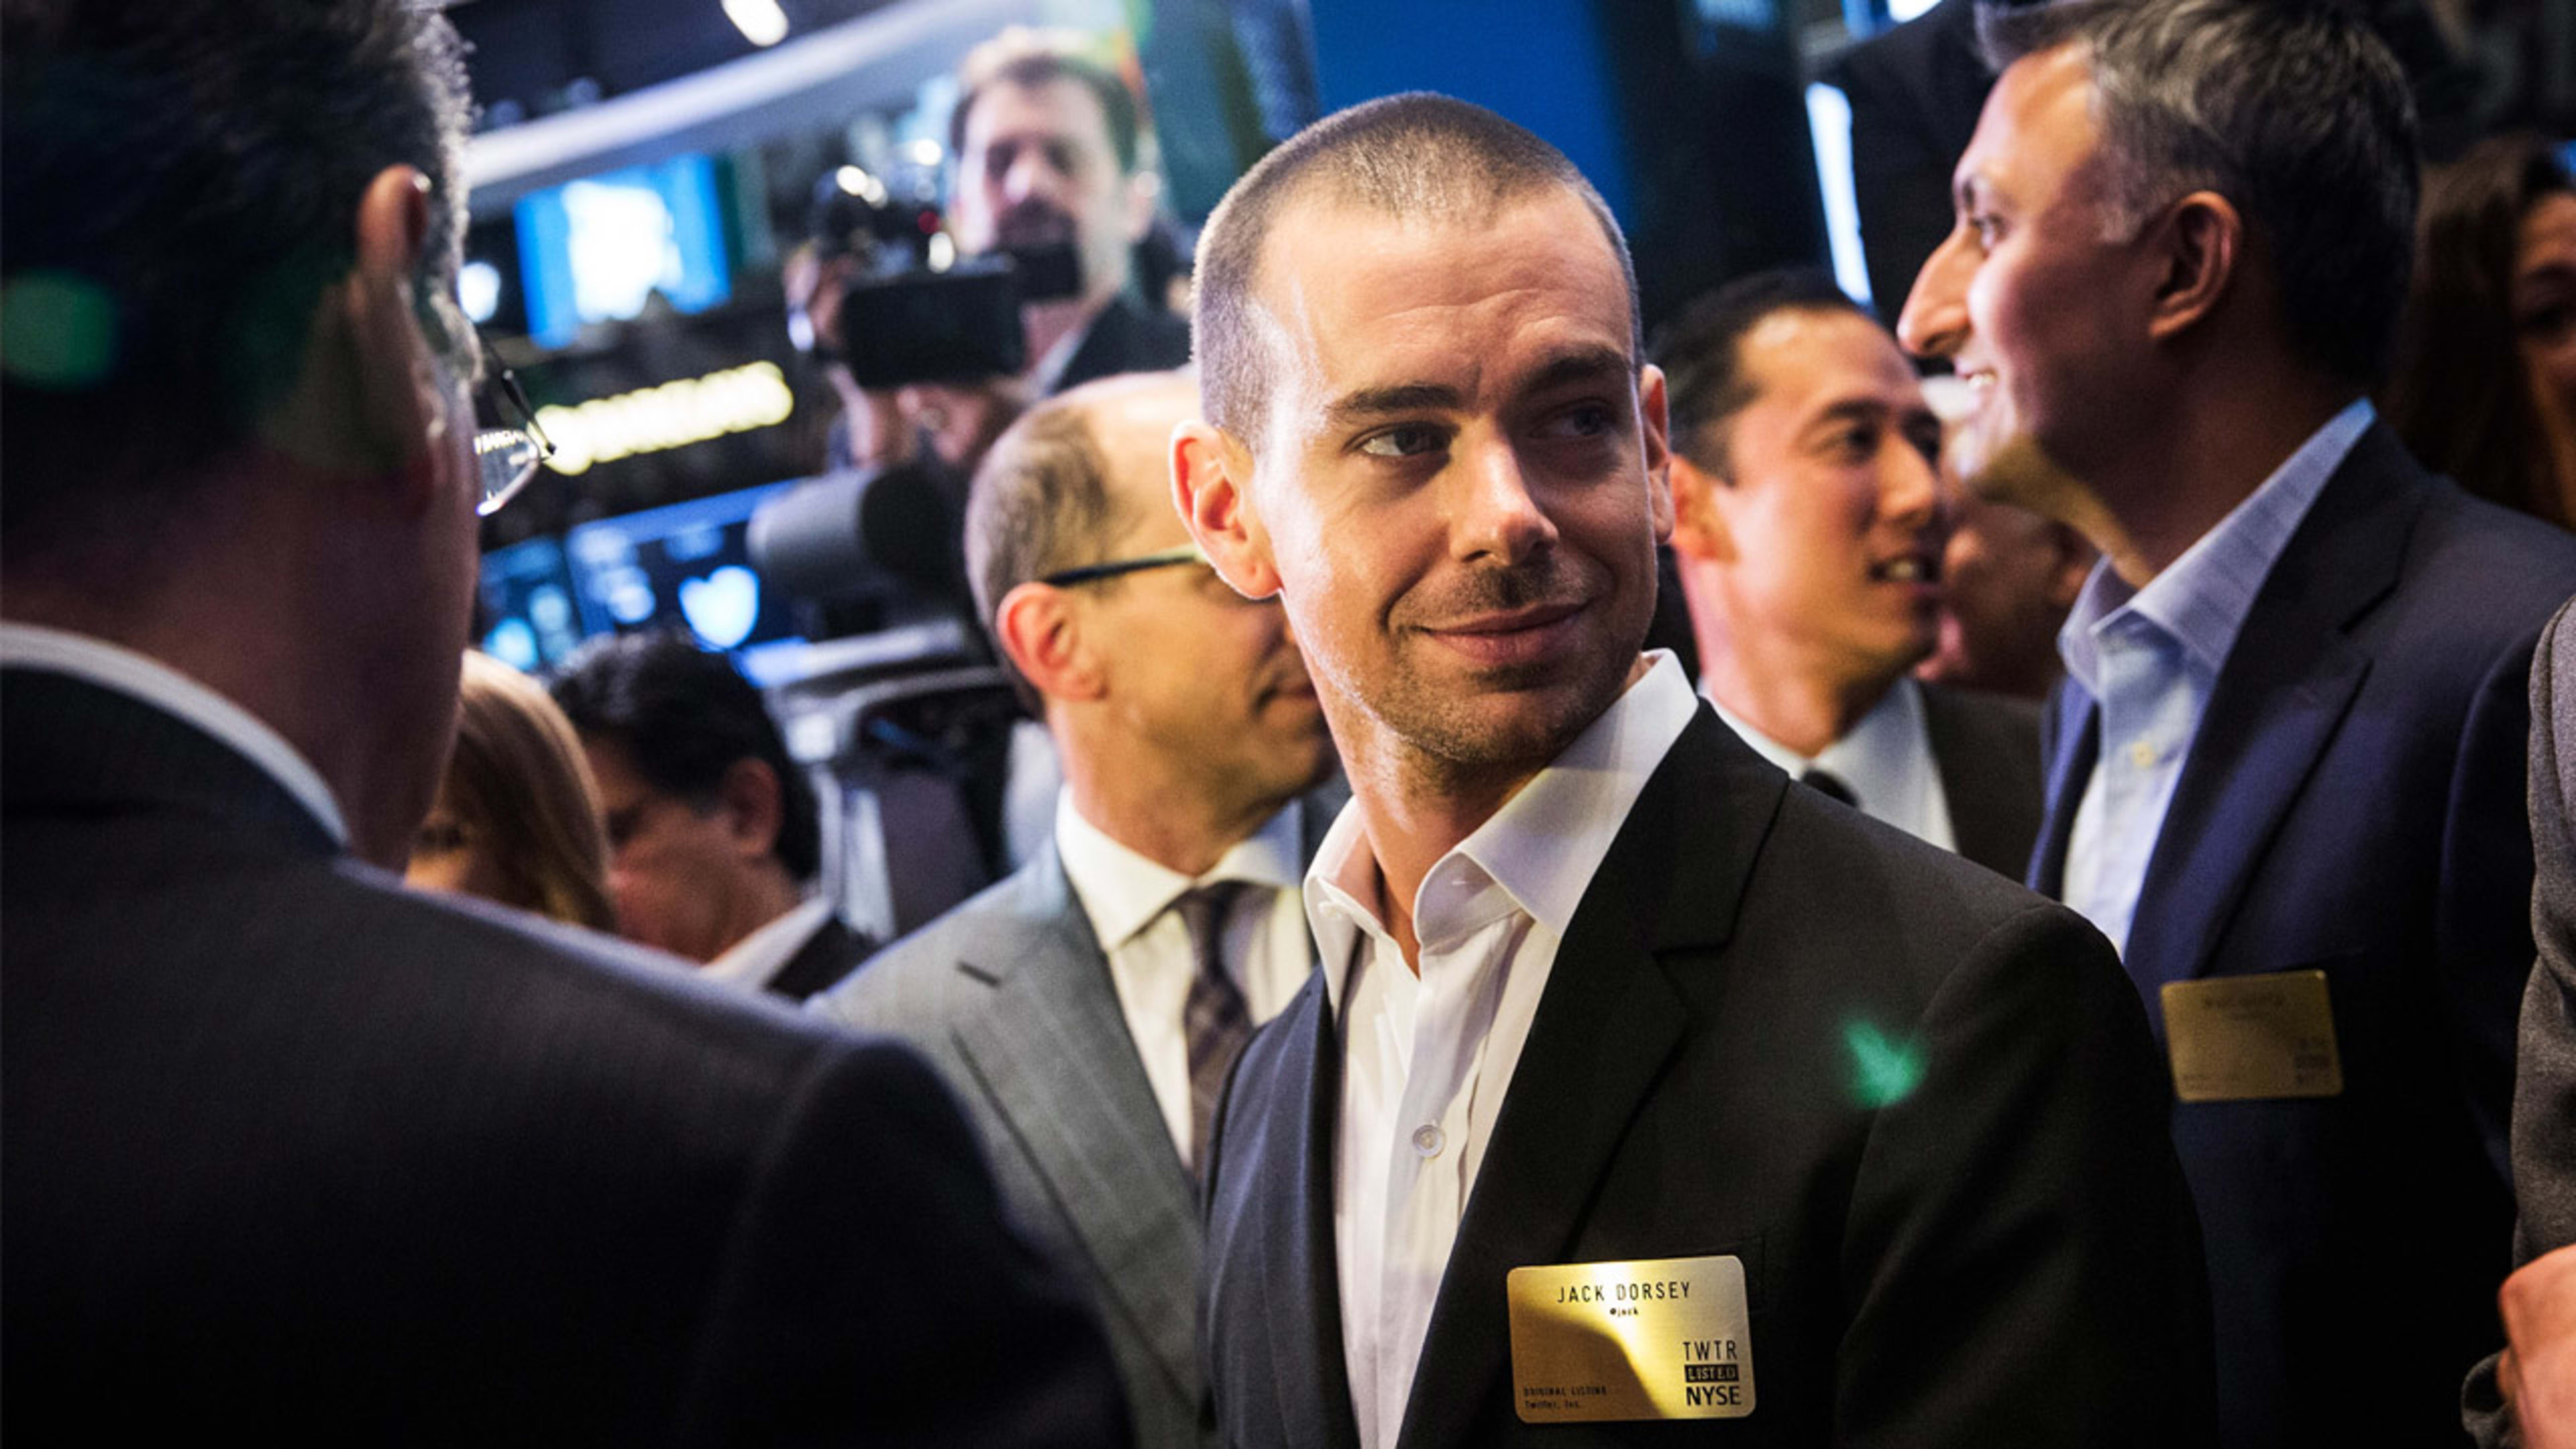 Square’s First Earnings Report: Can Dorsey Turn Things Around?